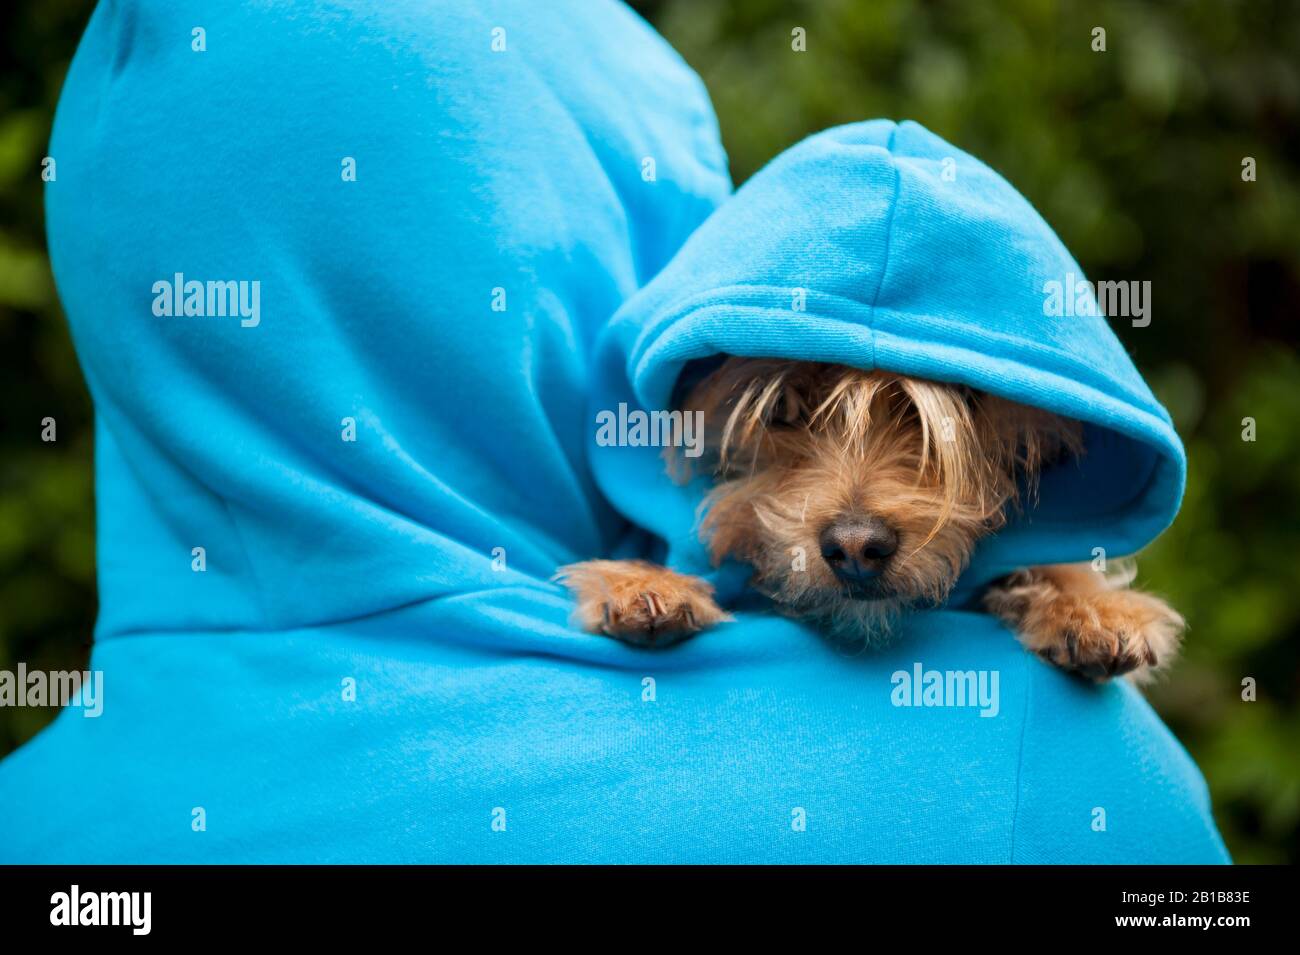 Furry dog looking over the shoulder of his owner in matching blue hoodies outdoors in bright green park background Stock Photo